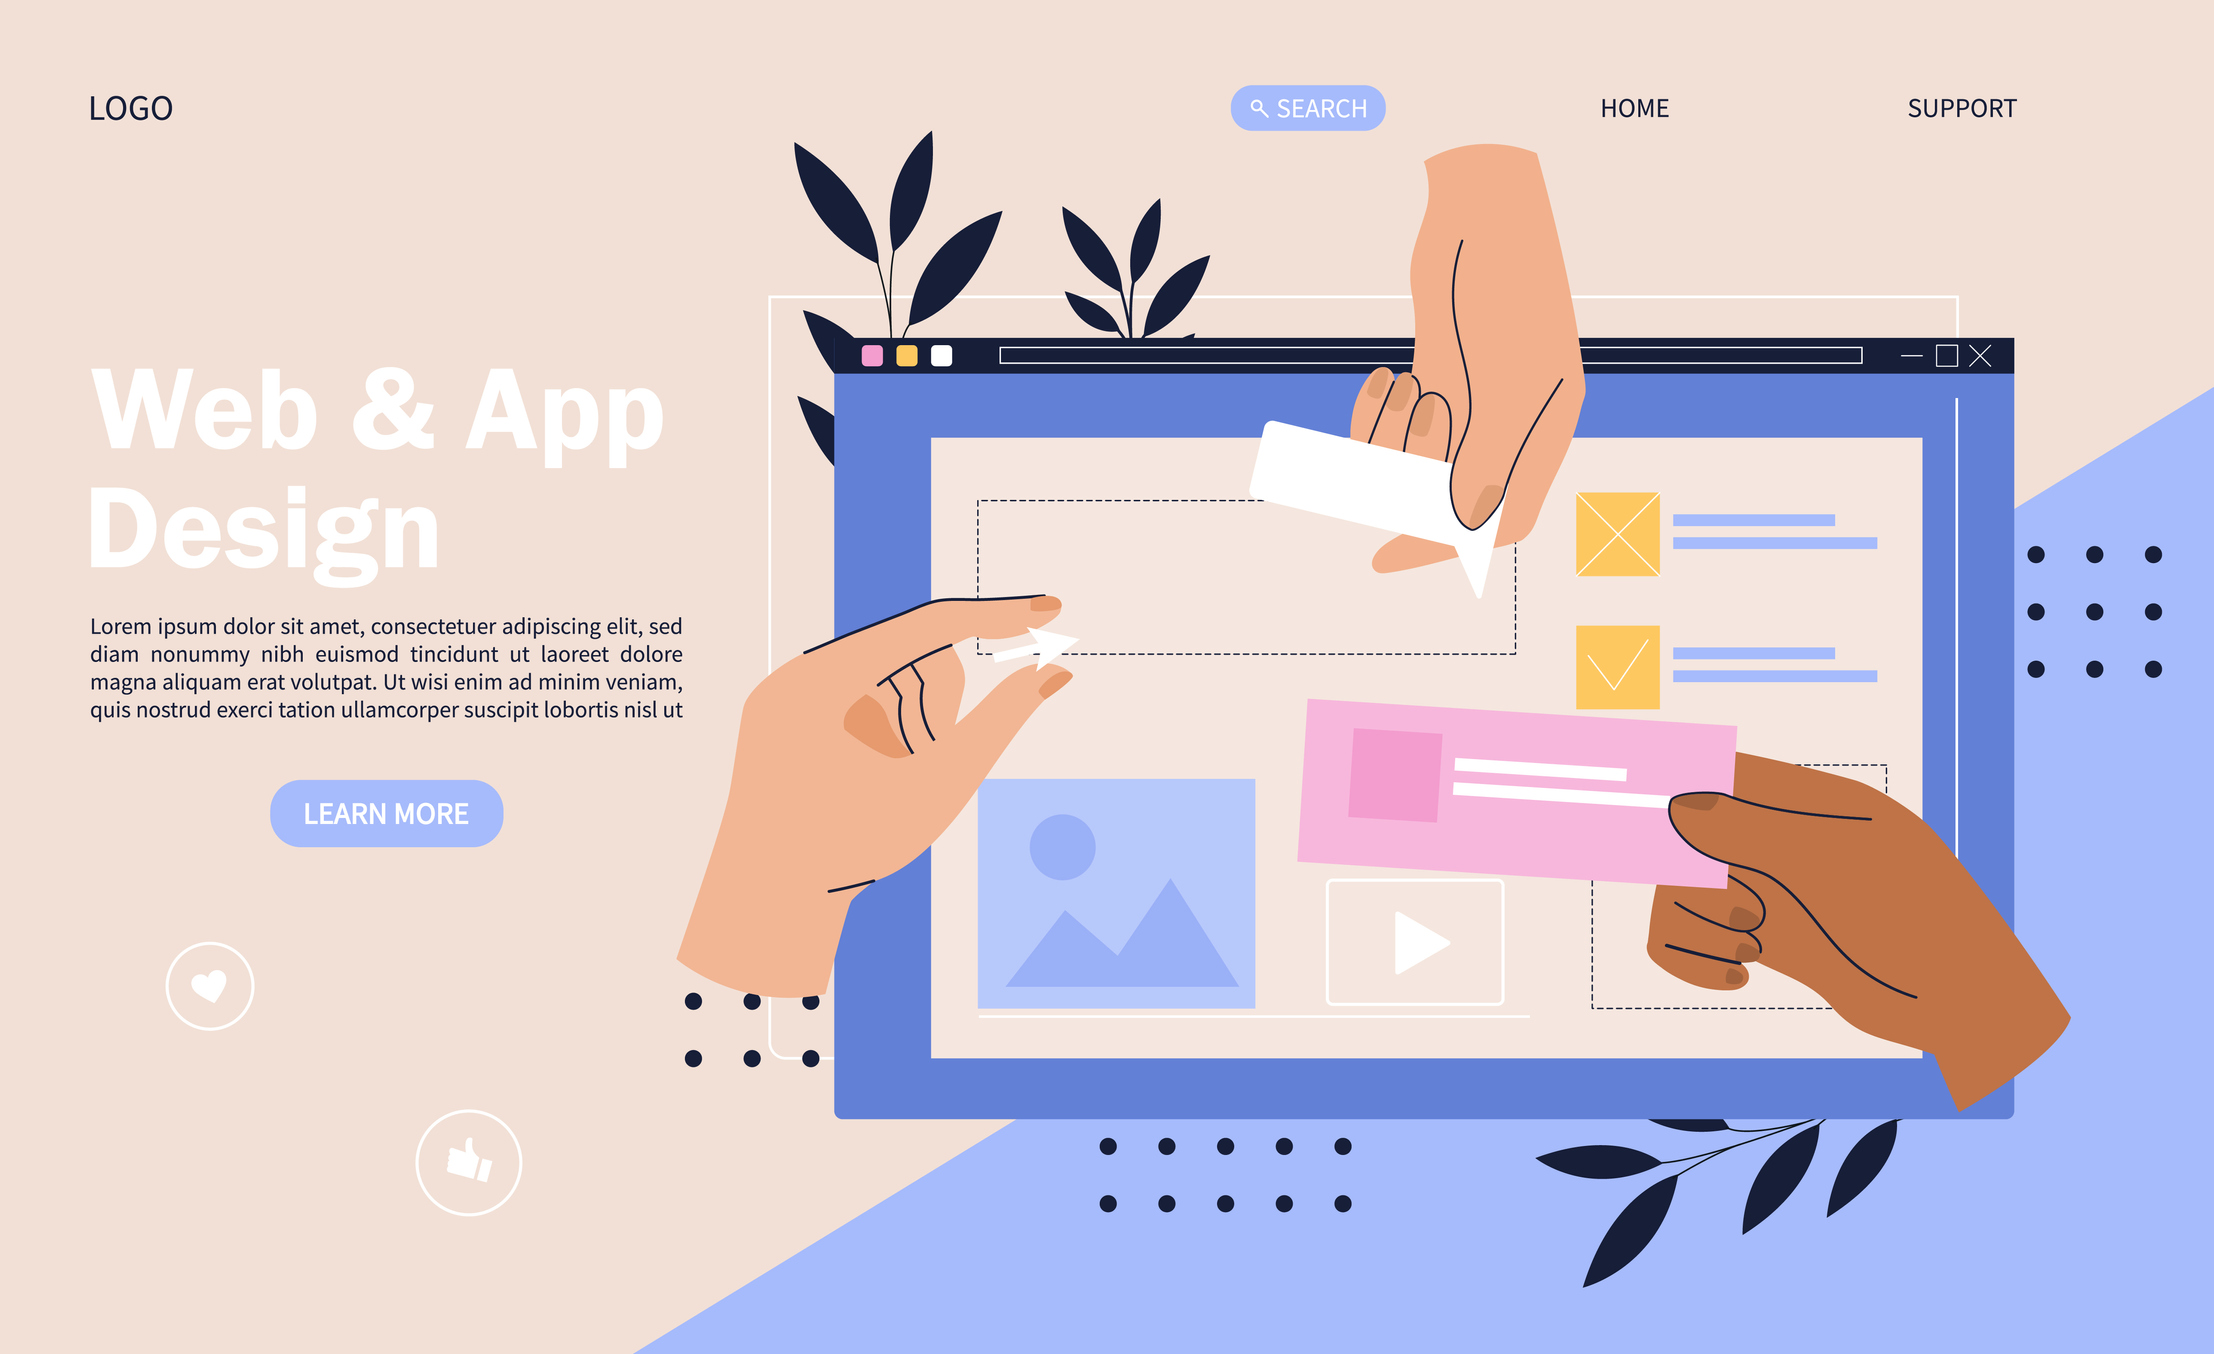 Web design concept with hands placing elements onto a digital device screen, flat cartoon colored vector illustration of a website landing page